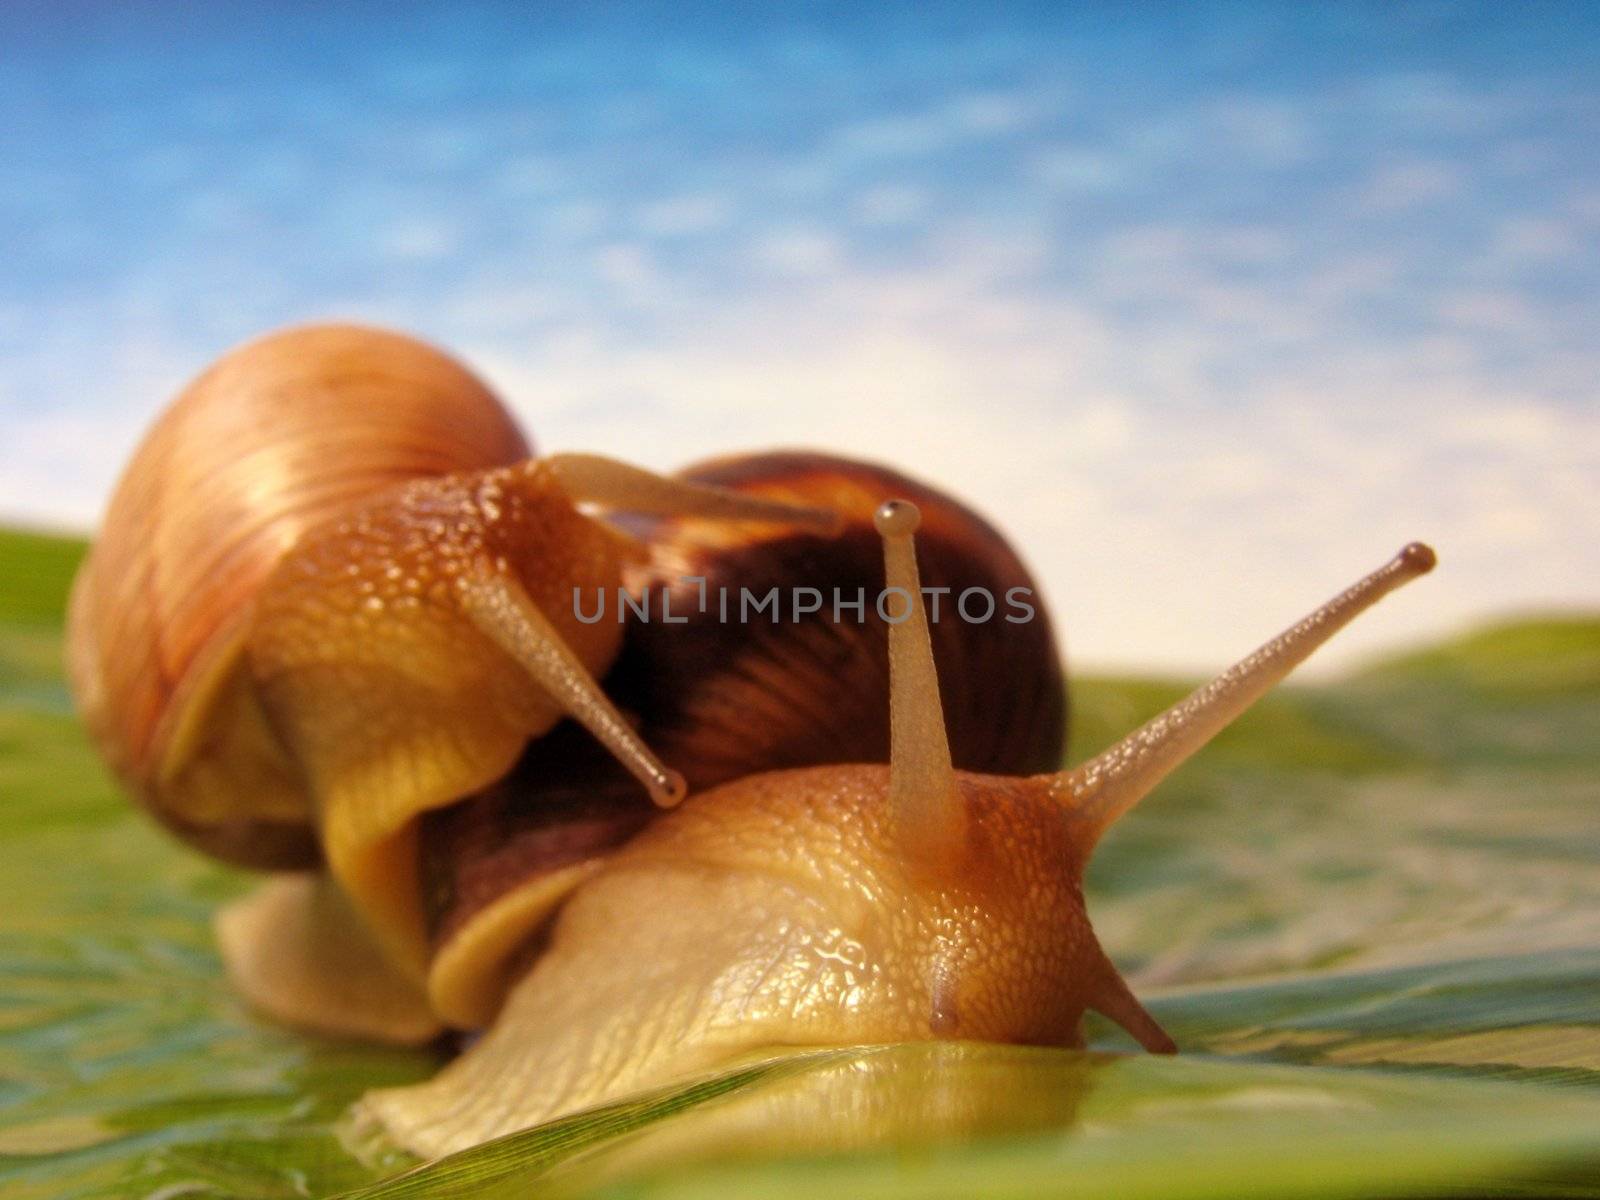 two snails by romantiche